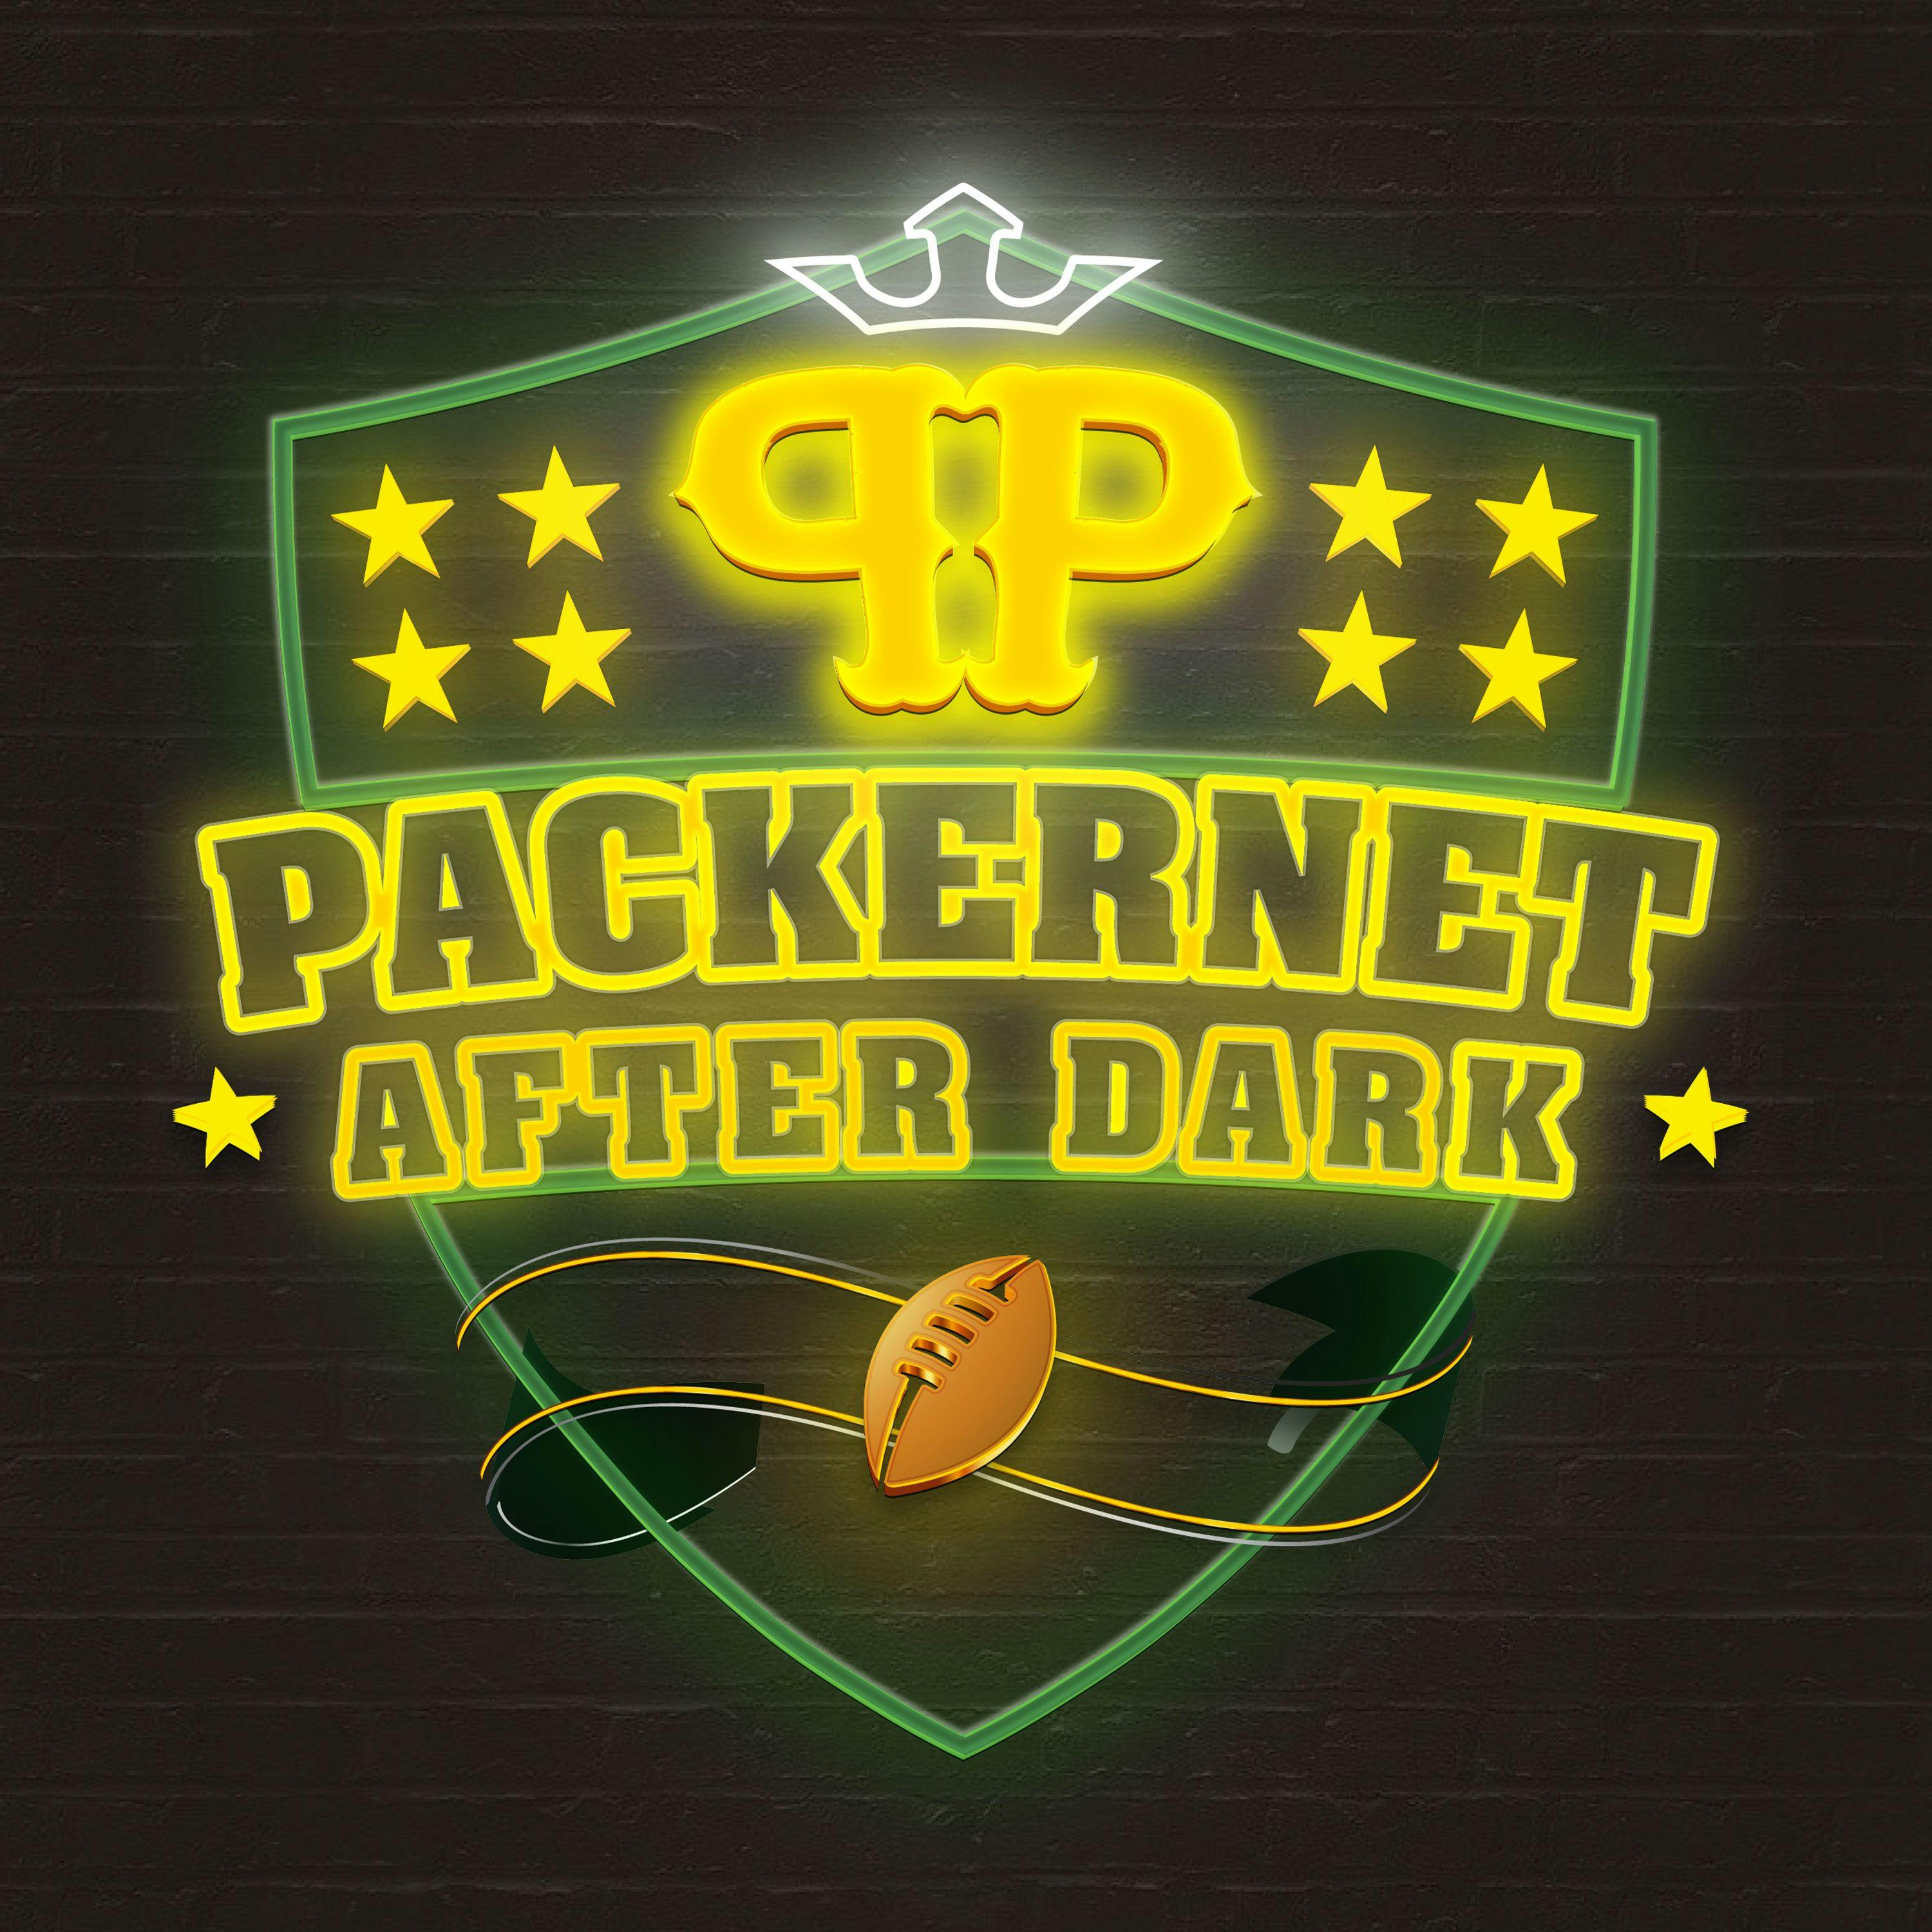 Packernet After Dark: Packer Backers Ponder Tolls, Tunes, and Team Trends